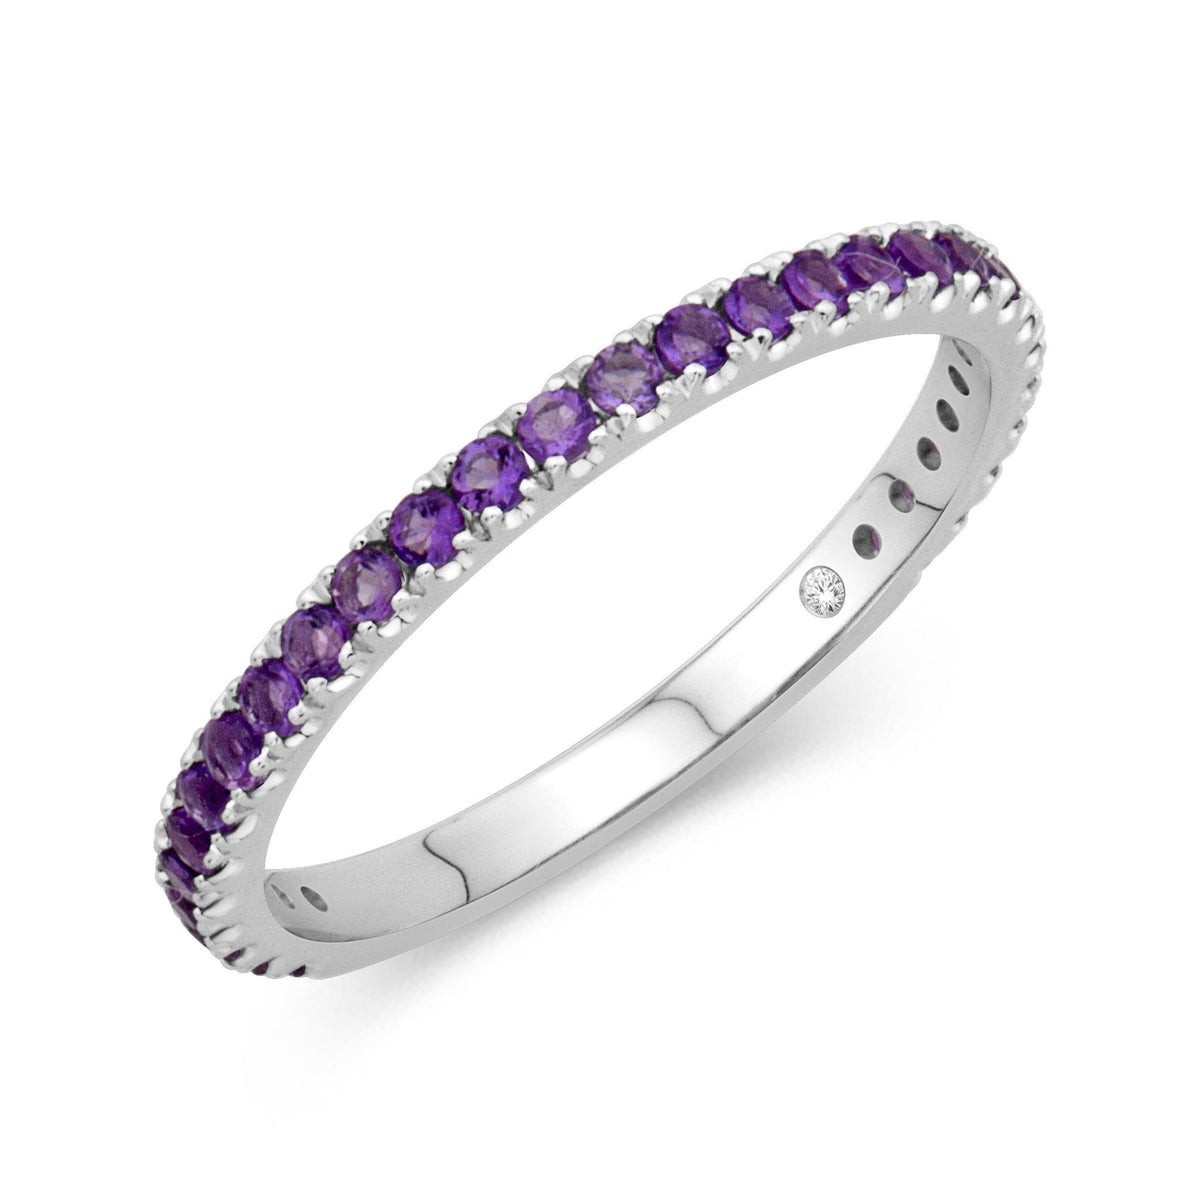 14Kt White Gold Stackable Gemstone Ring With 0.38ct Amethysts